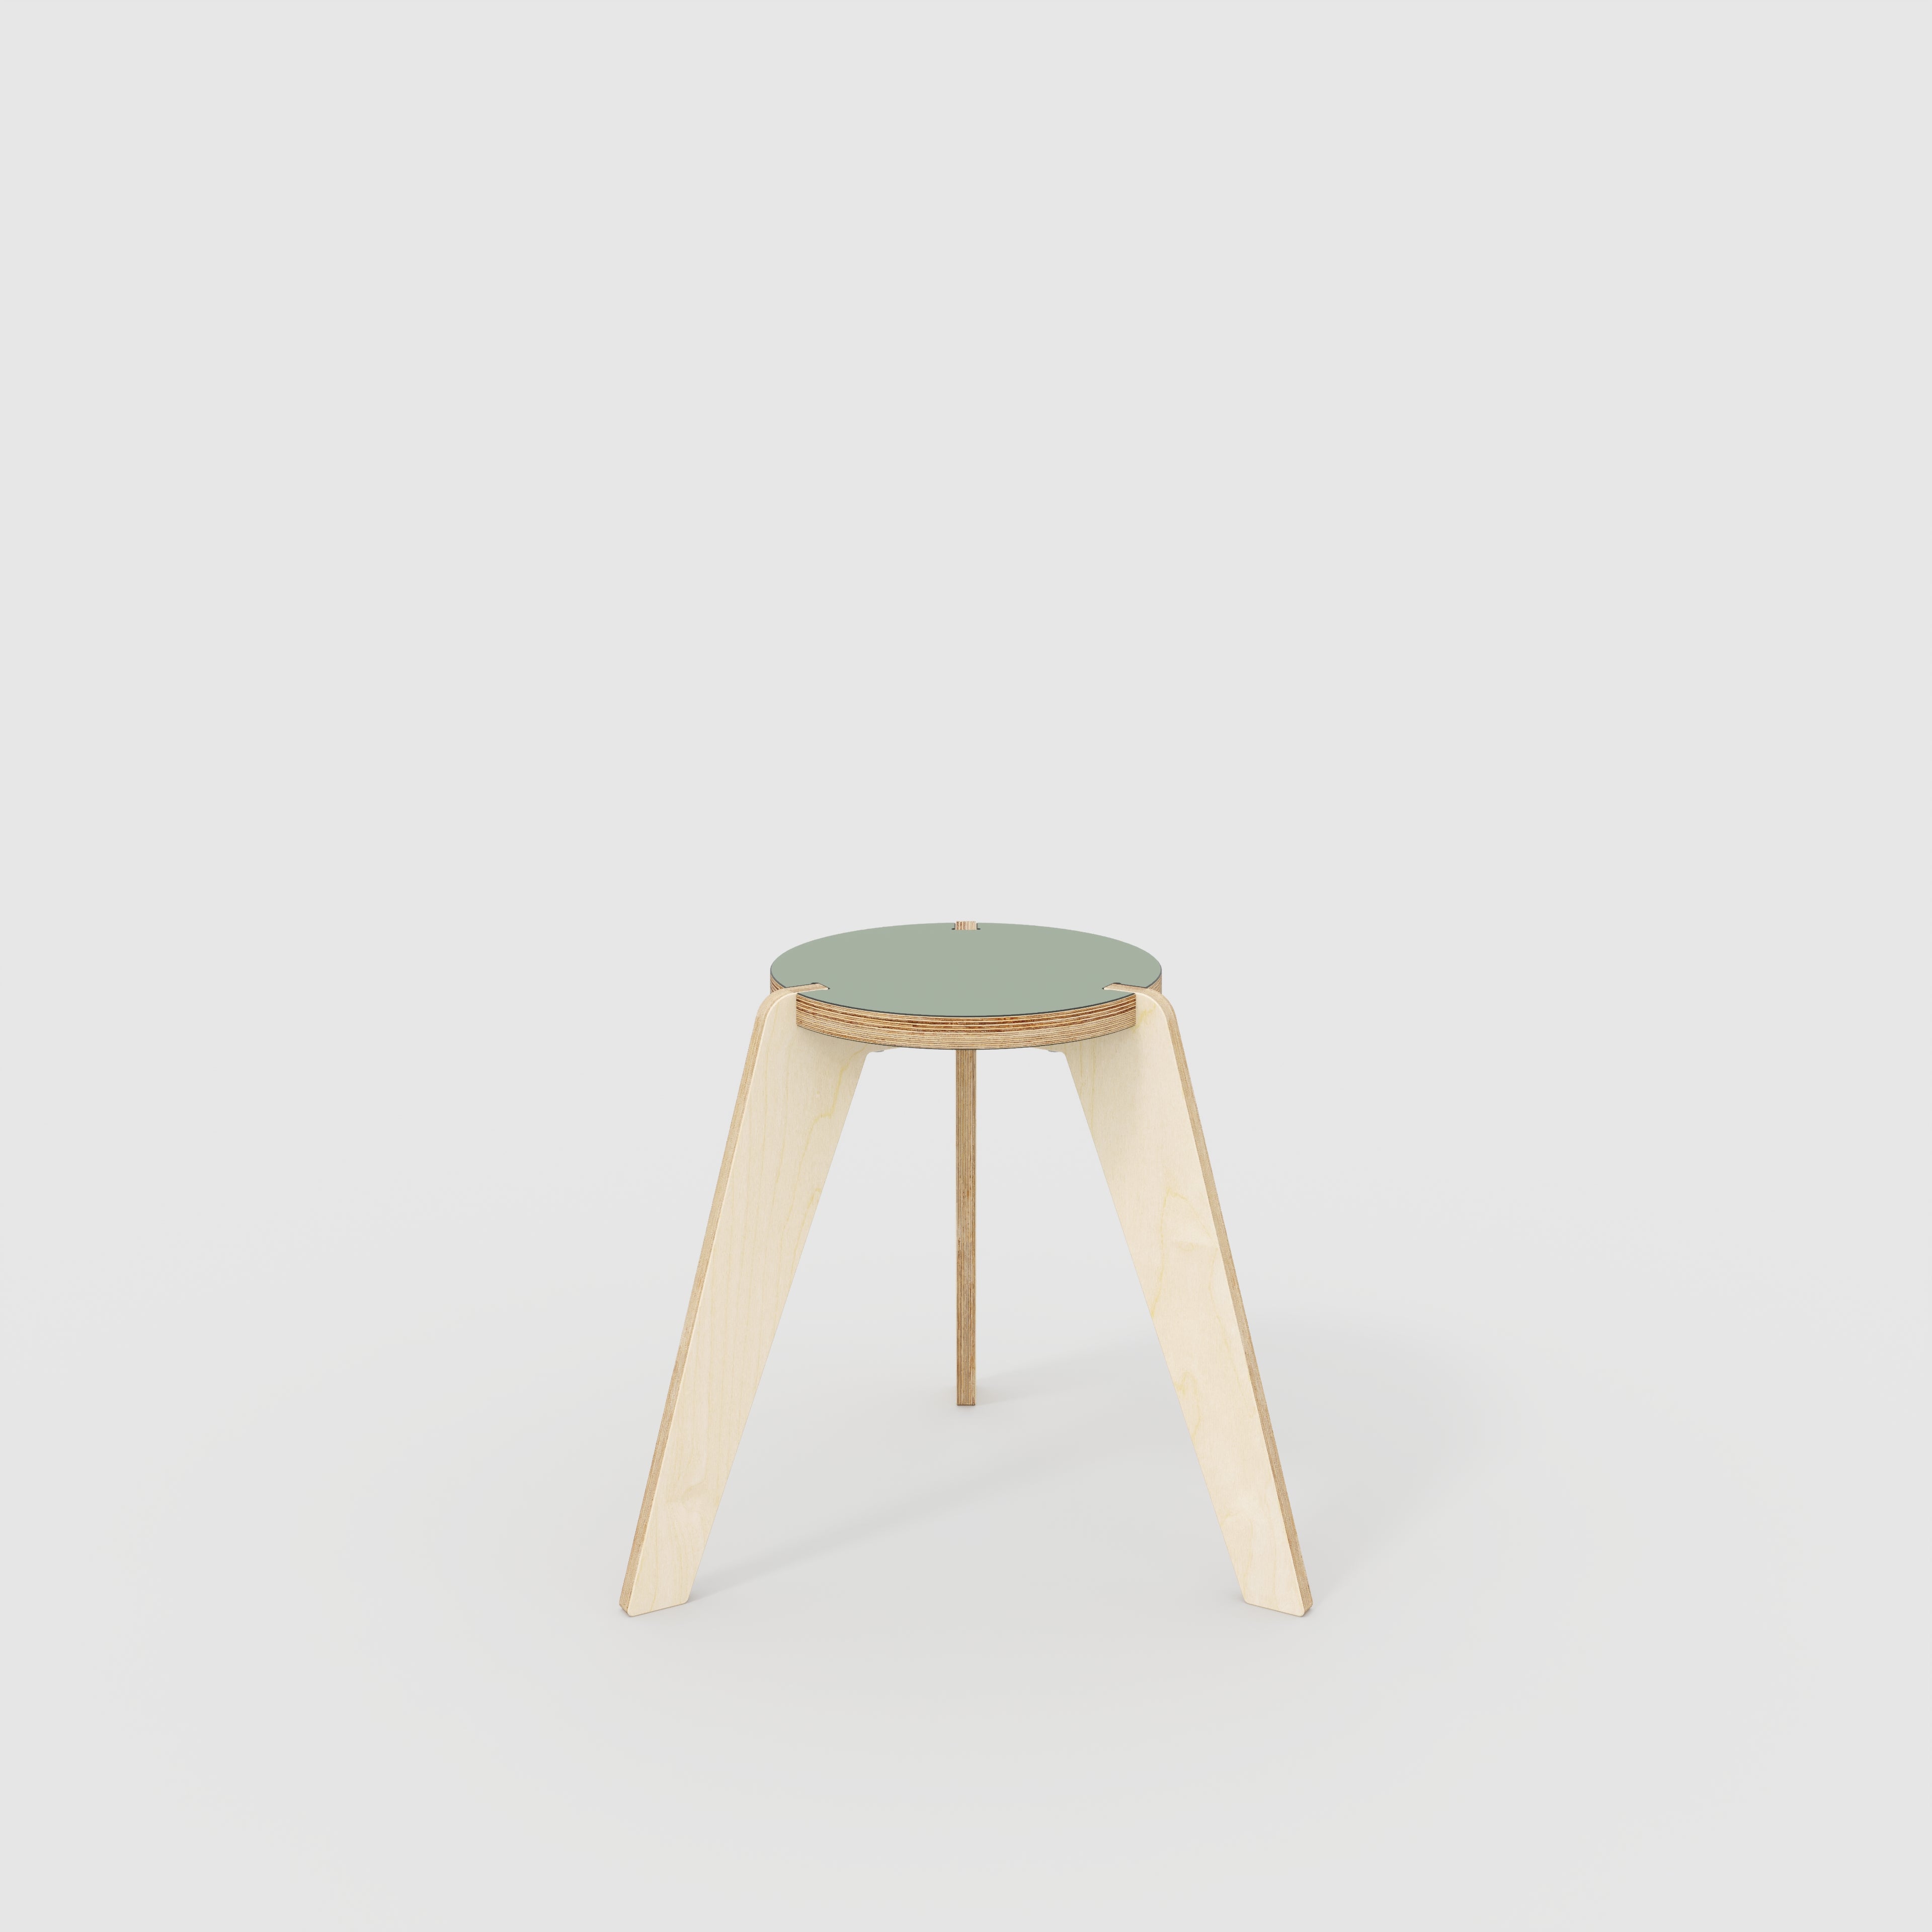 Round Stool with Plywood Legs - Formica Green Slate - 525(w) x 450(d) x 450(h)